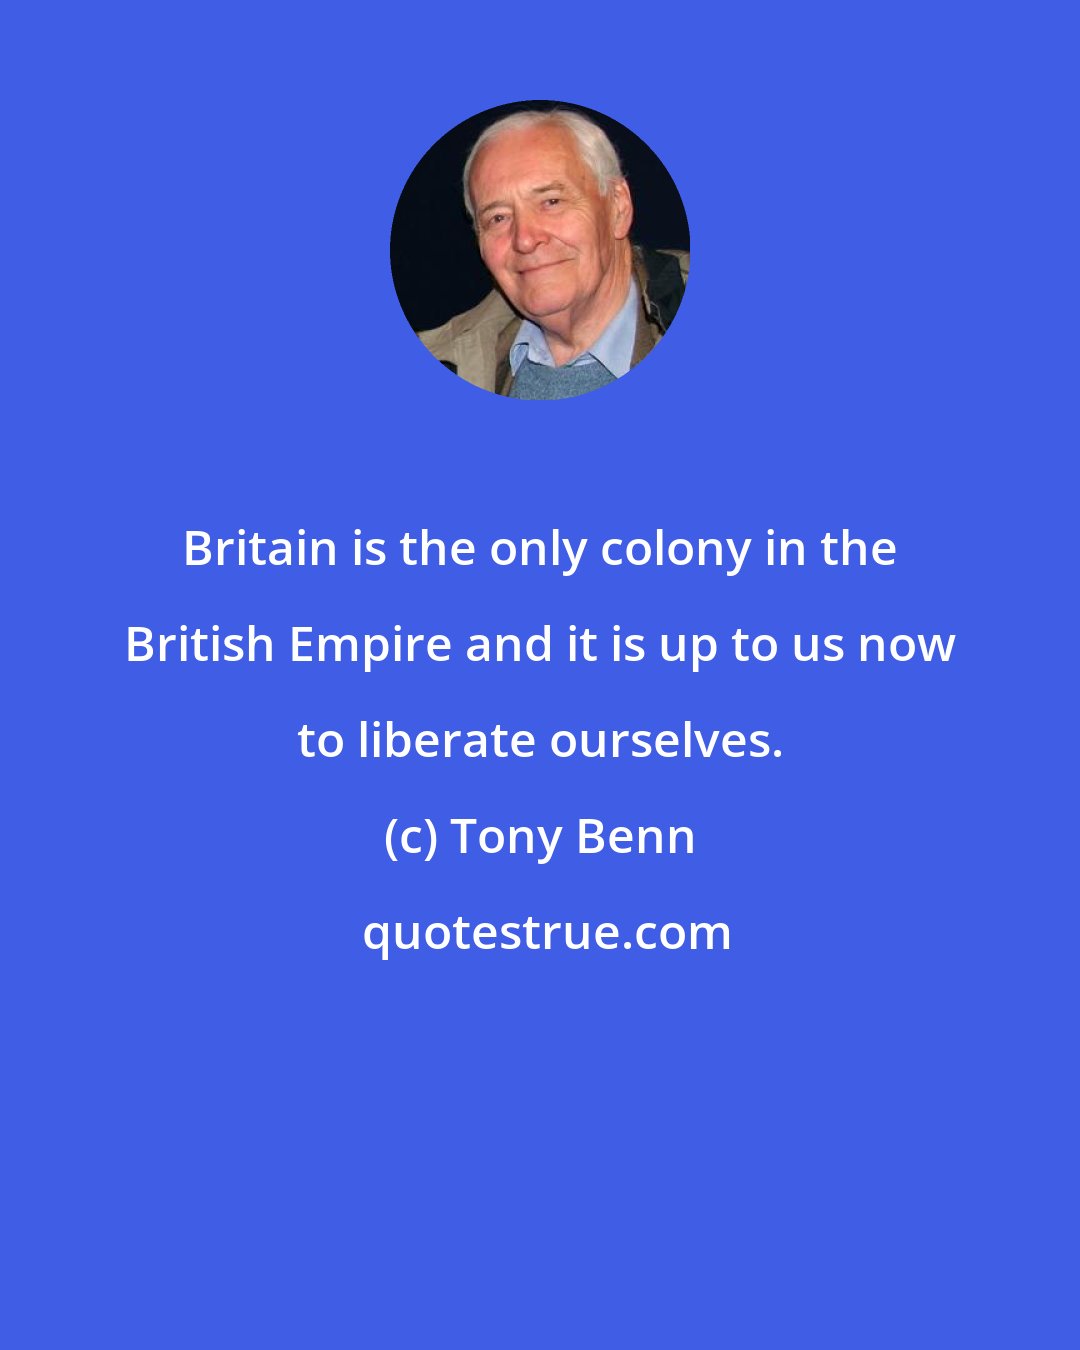 Tony Benn: Britain is the only colony in the British Empire and it is up to us now to liberate ourselves.